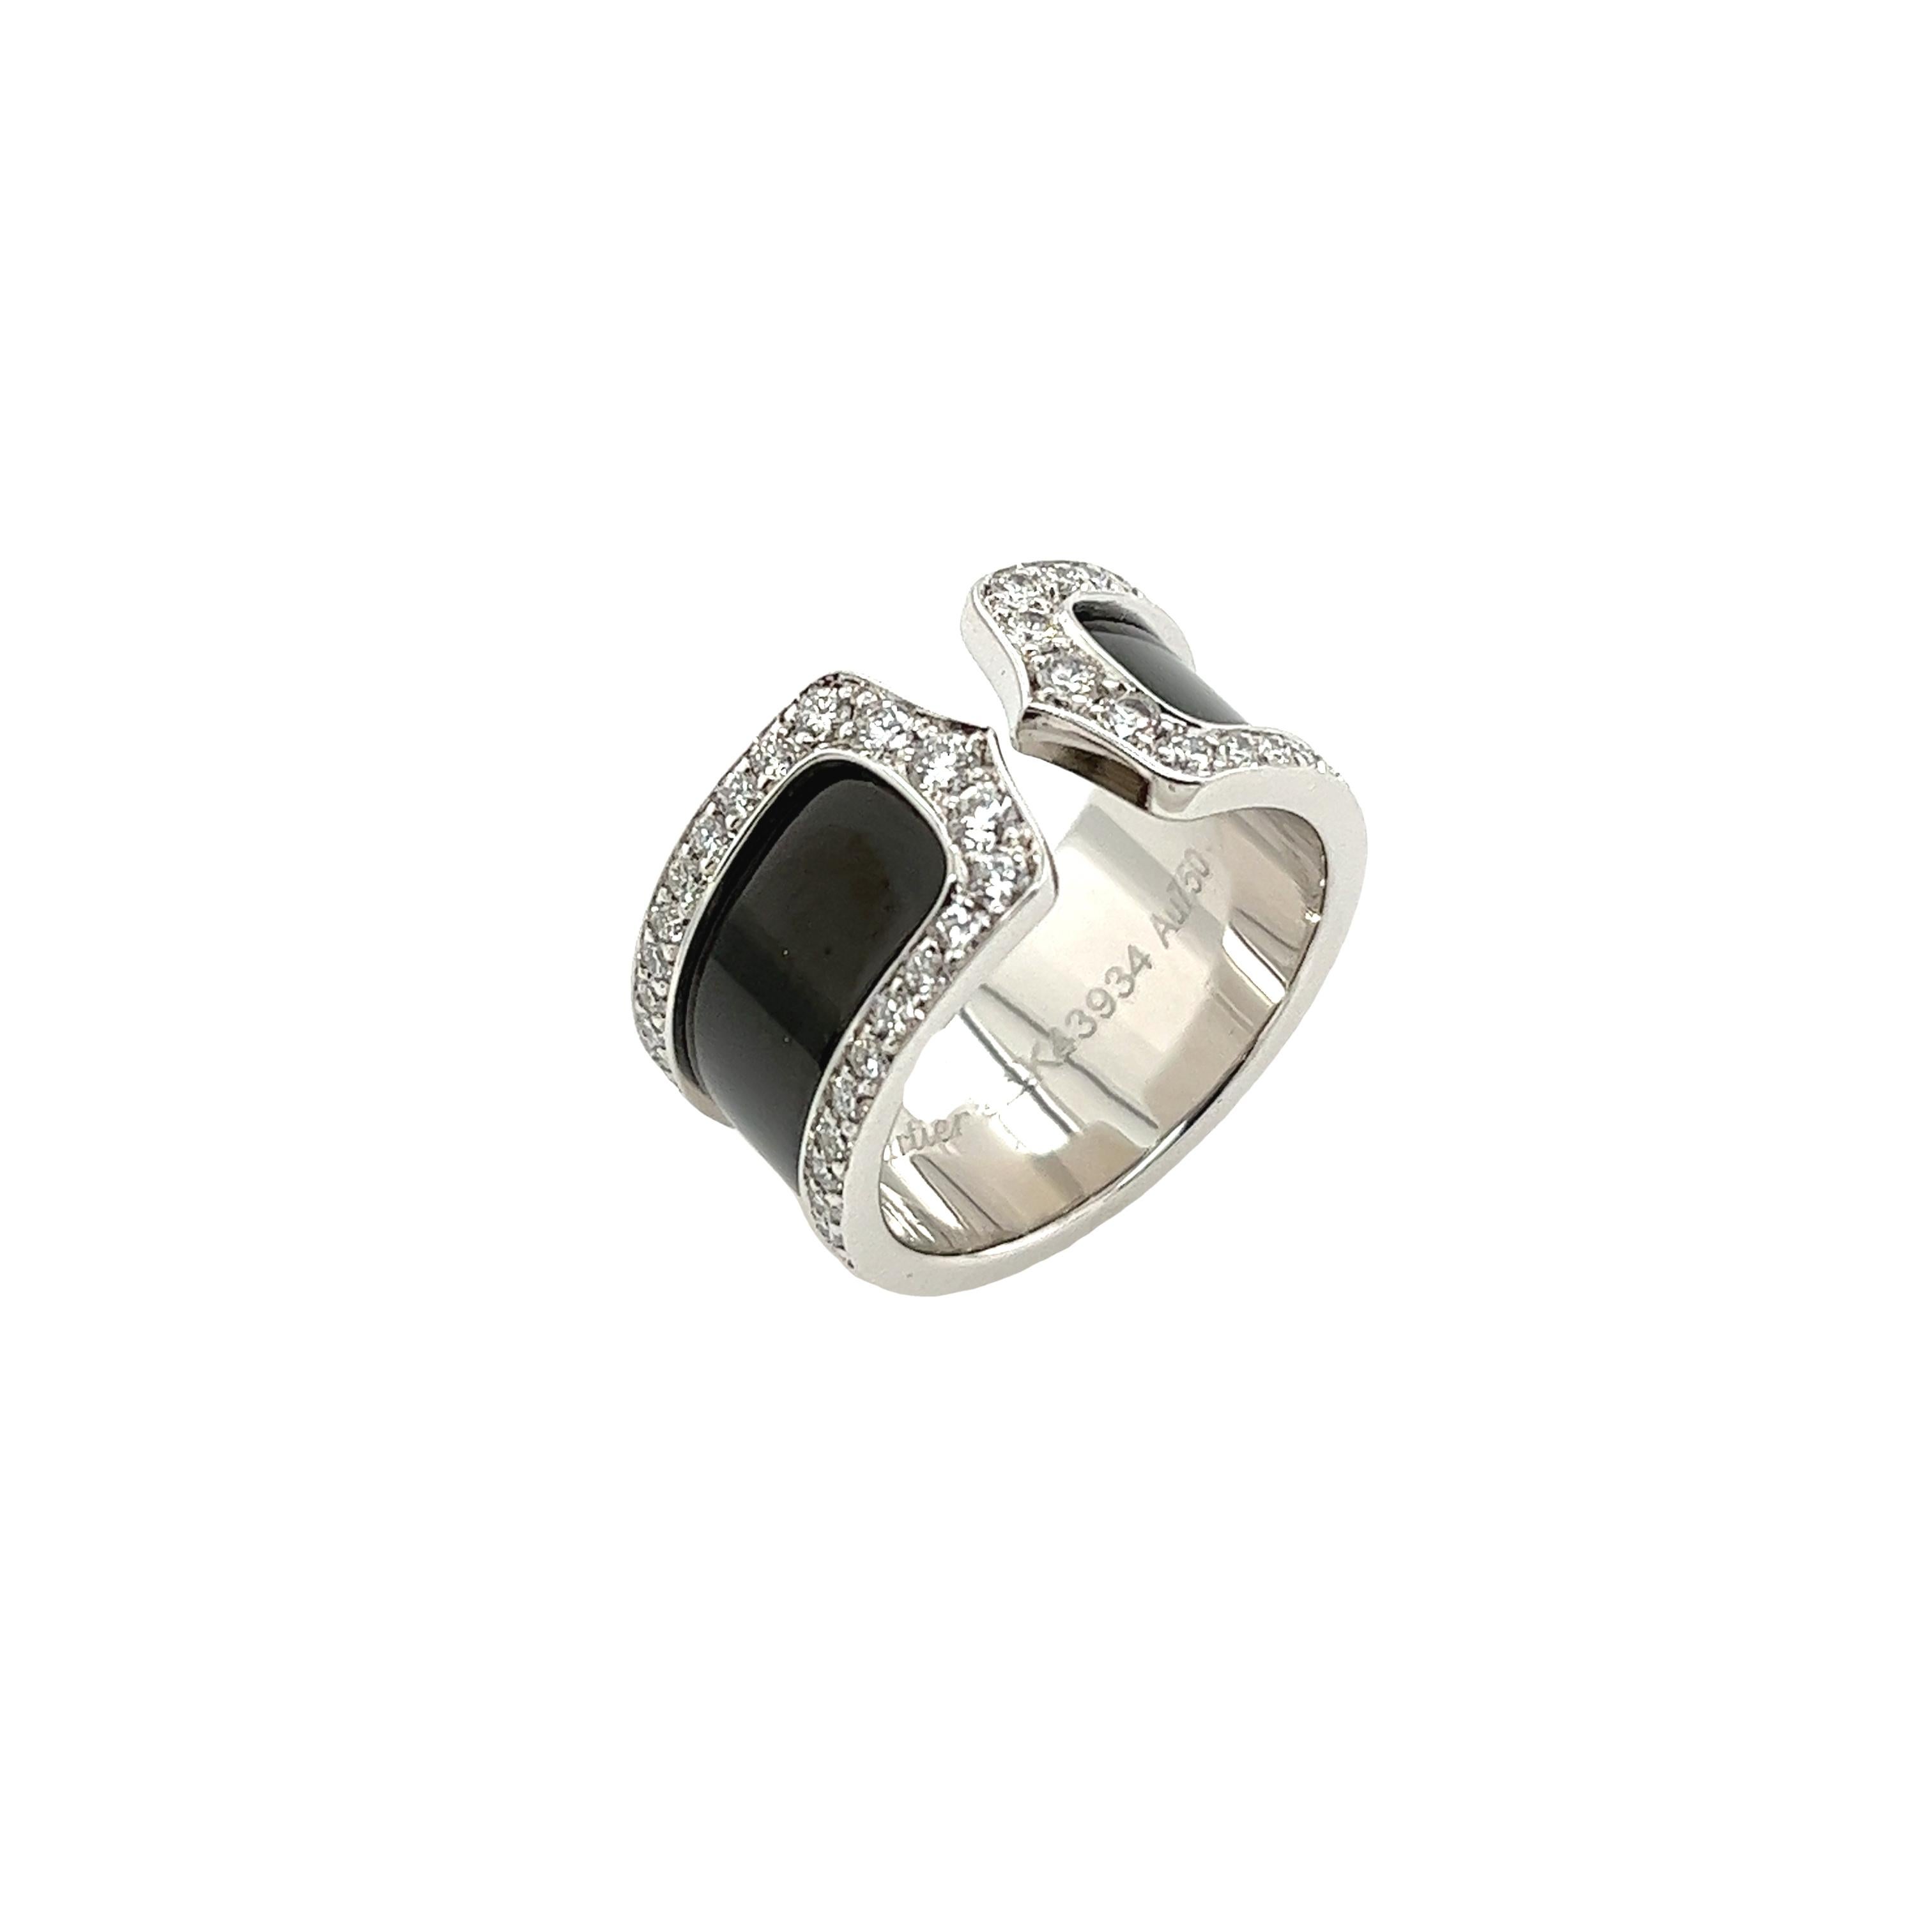 Embrace elegance with the Cartier Logo Double C De Cartier Ring in 18ct white gold. Adorned with dazzling diamonds and featuring the iconic double C logo, this ring is a symbol of luxury and sophistication. Designed to captivate with its delicate